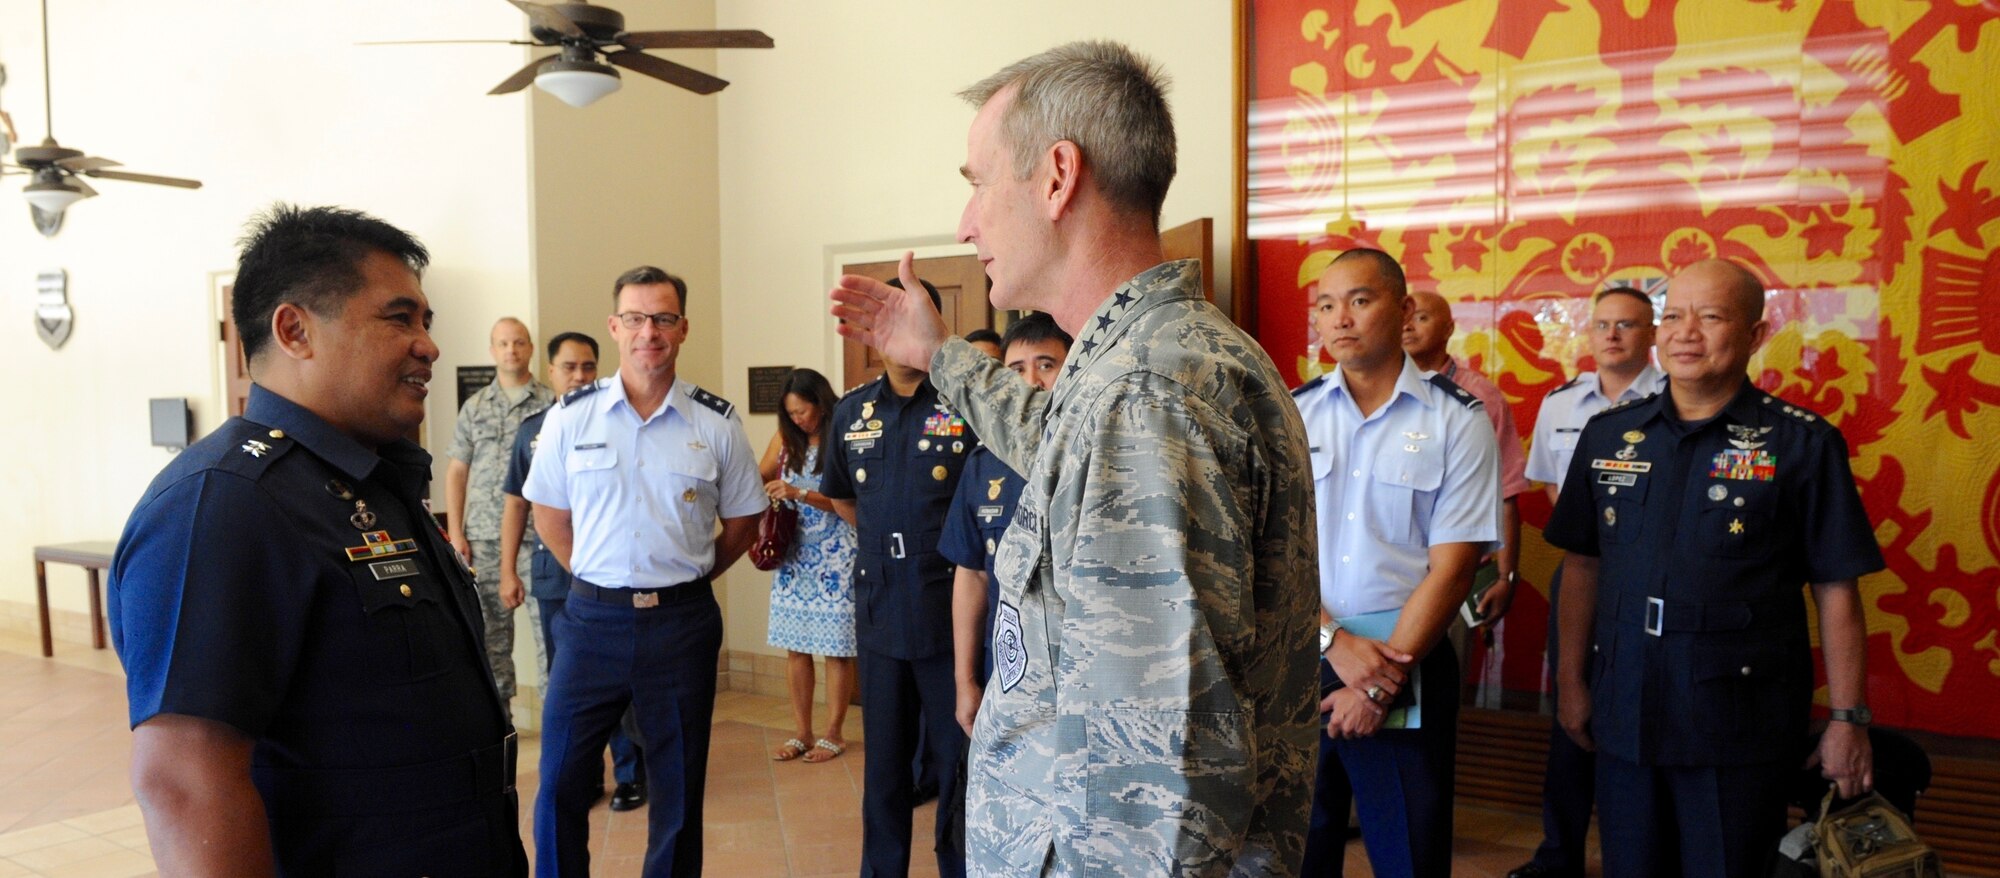 Gen. Terrence J. O'Shaughnessy, Pacific Air Forces commander, right, and Maj. Gen. Conrado V. Parra, Jr., Philippine Air Force vice commander, greet each other during the fifth annual U.S. and Philippine Airman-to-Airman (A2A) Talks at Joint Base Pearl Harbor-Hickam, Hawaii, Aug. 29, 2016.  The three-day A2A talks between Pacific Air Forces and the Philippine Air Force is a forum to plan and discuss future operations, activities and actions (OAA) and strengthen the AF-AF relationship.  The talks are air forces specific enabling dialogue for regional security cooperation in air operations. (U.S. Air Force photo by Staff Sgt. Alexander Martinez)